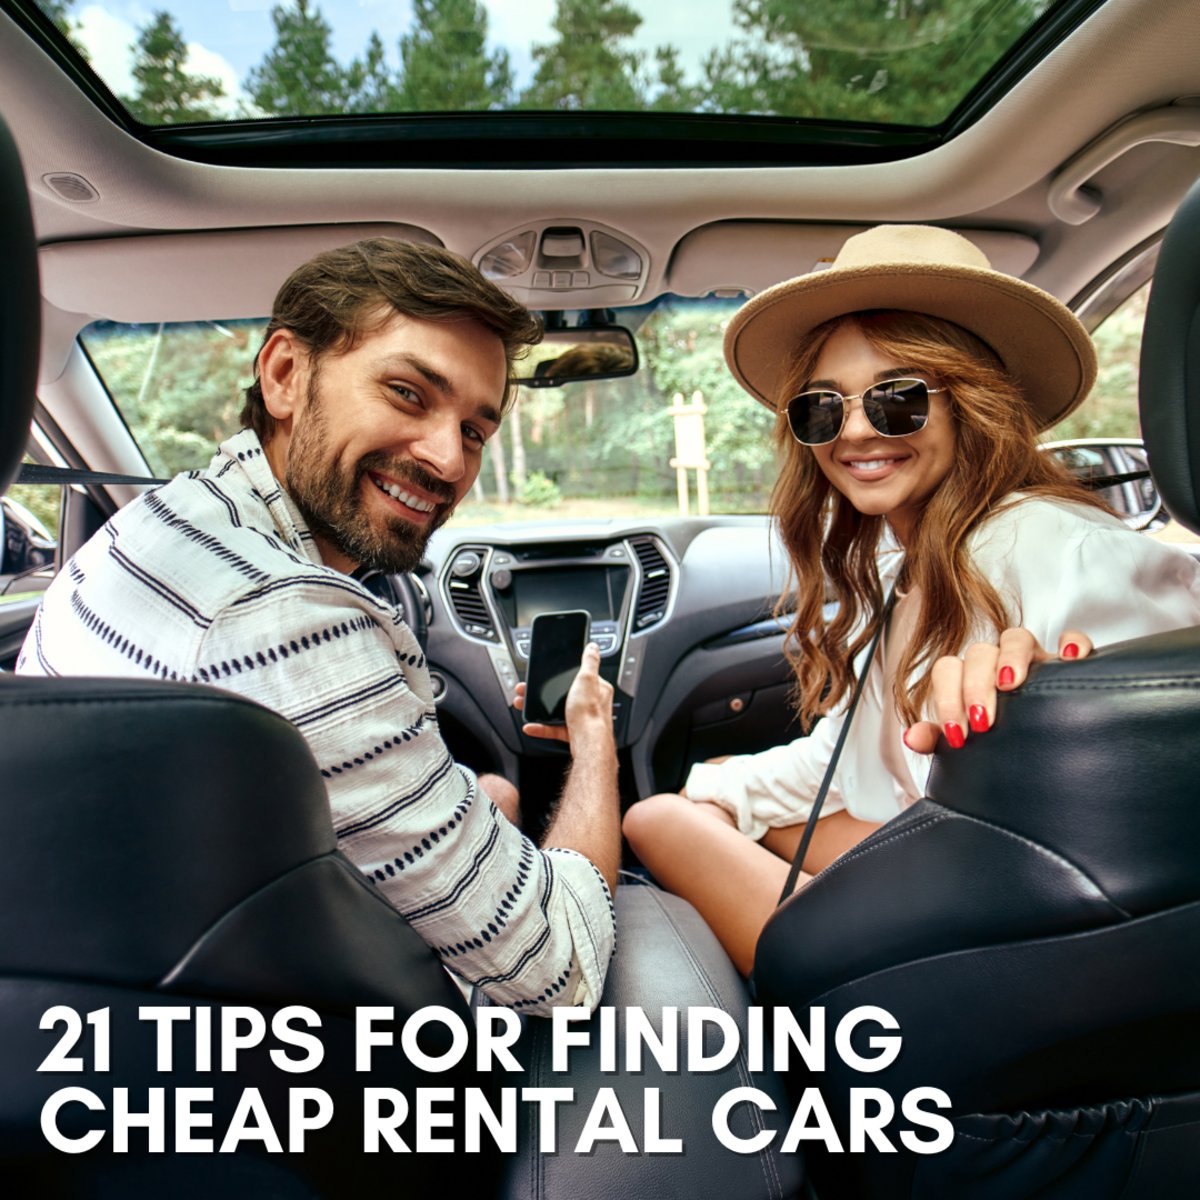 Planning on hitting the open road on your way to Lincoln City? 🚗 Read these 21 tips for scoring sweet deals on #rentalcars so that you can explore without breaking the bank. bit.ly/3uBCqBJ #roadtrip #savvytraveler